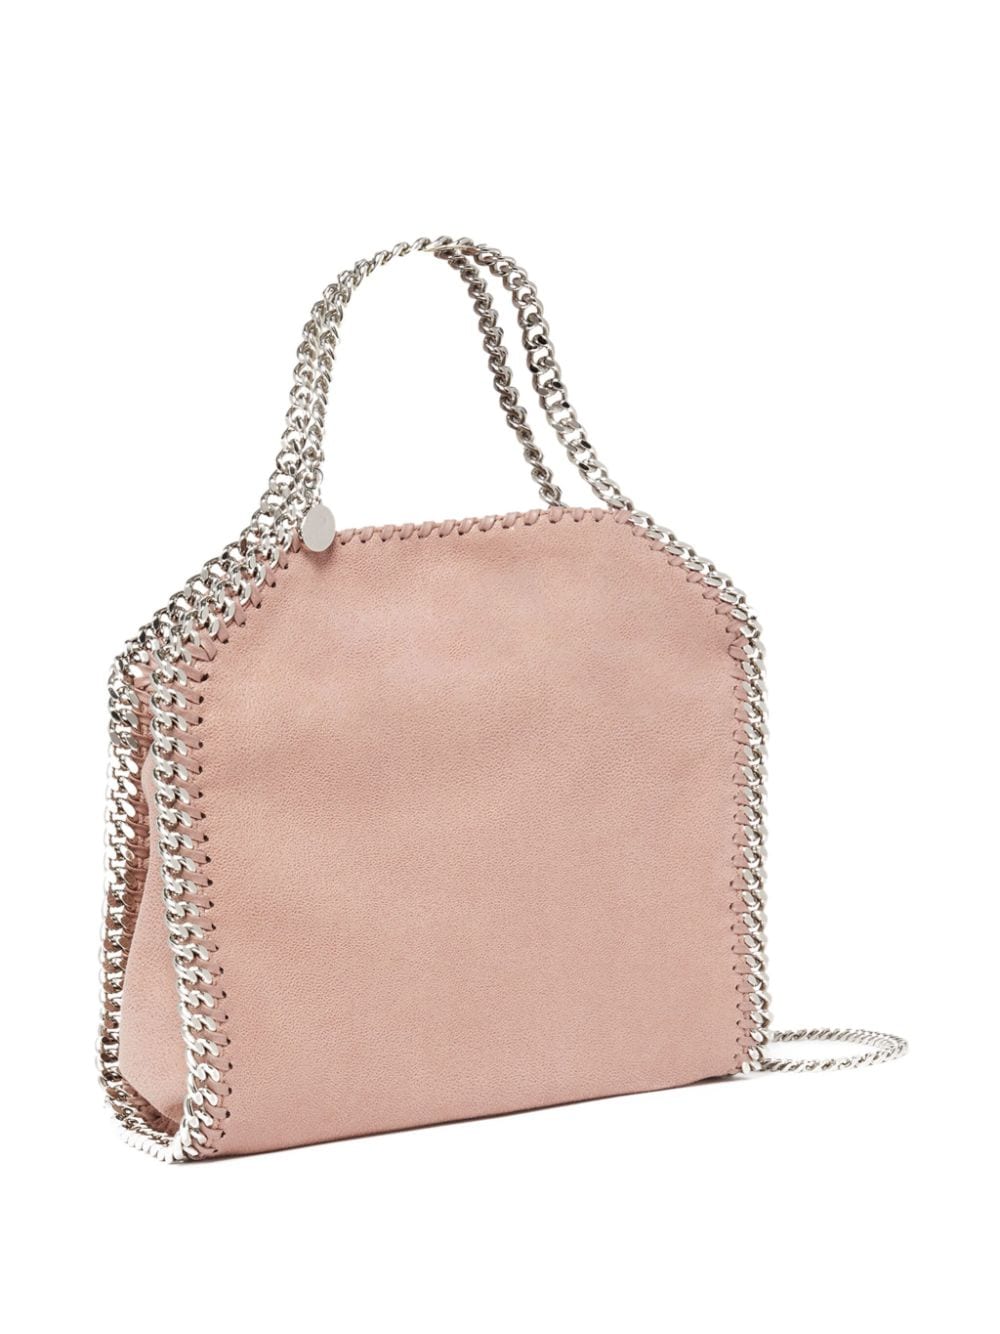 STELLA MCCARTNEY Small Falabella Purple Shoulder Bag in Organic Cotton and Recycled Materials